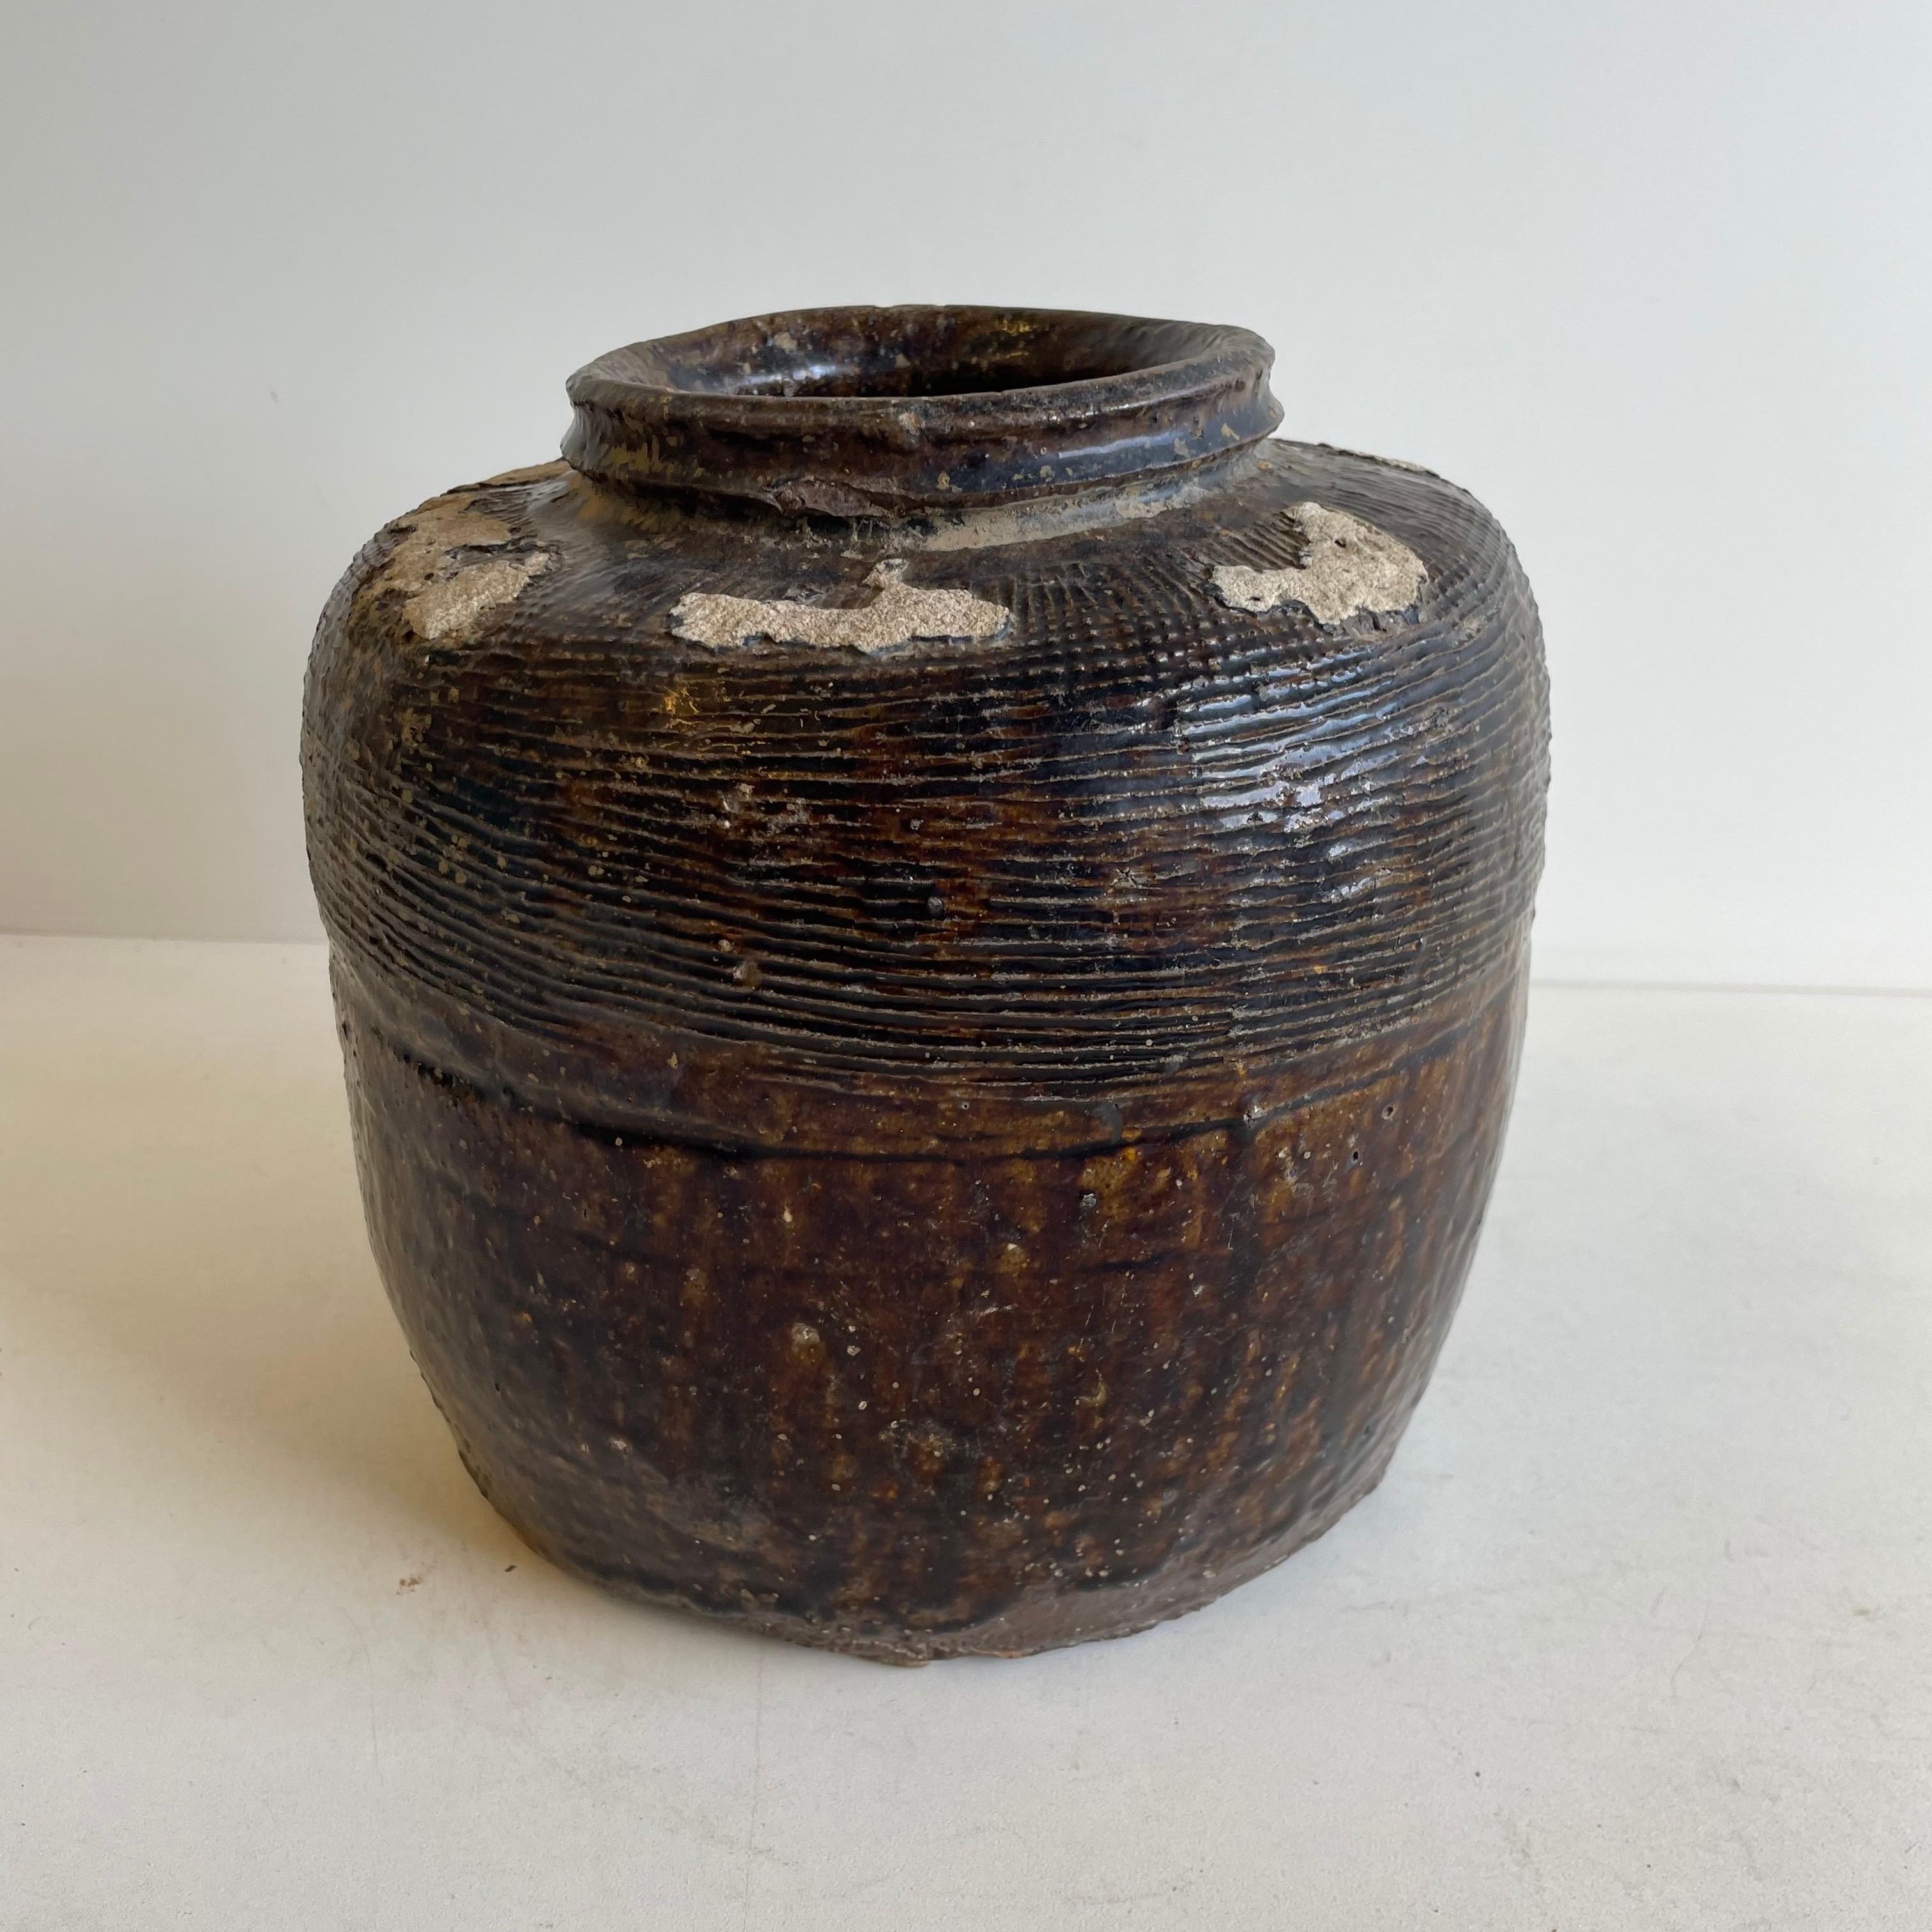 Beautifully glazed and rich in character, this vintage glazed oil pot adds just the right amount of texture + warmth where you need it. Stunning glazed finish with warm terra-cotta accents.
Coloring is an olive green, dark brown tones.
Each piece